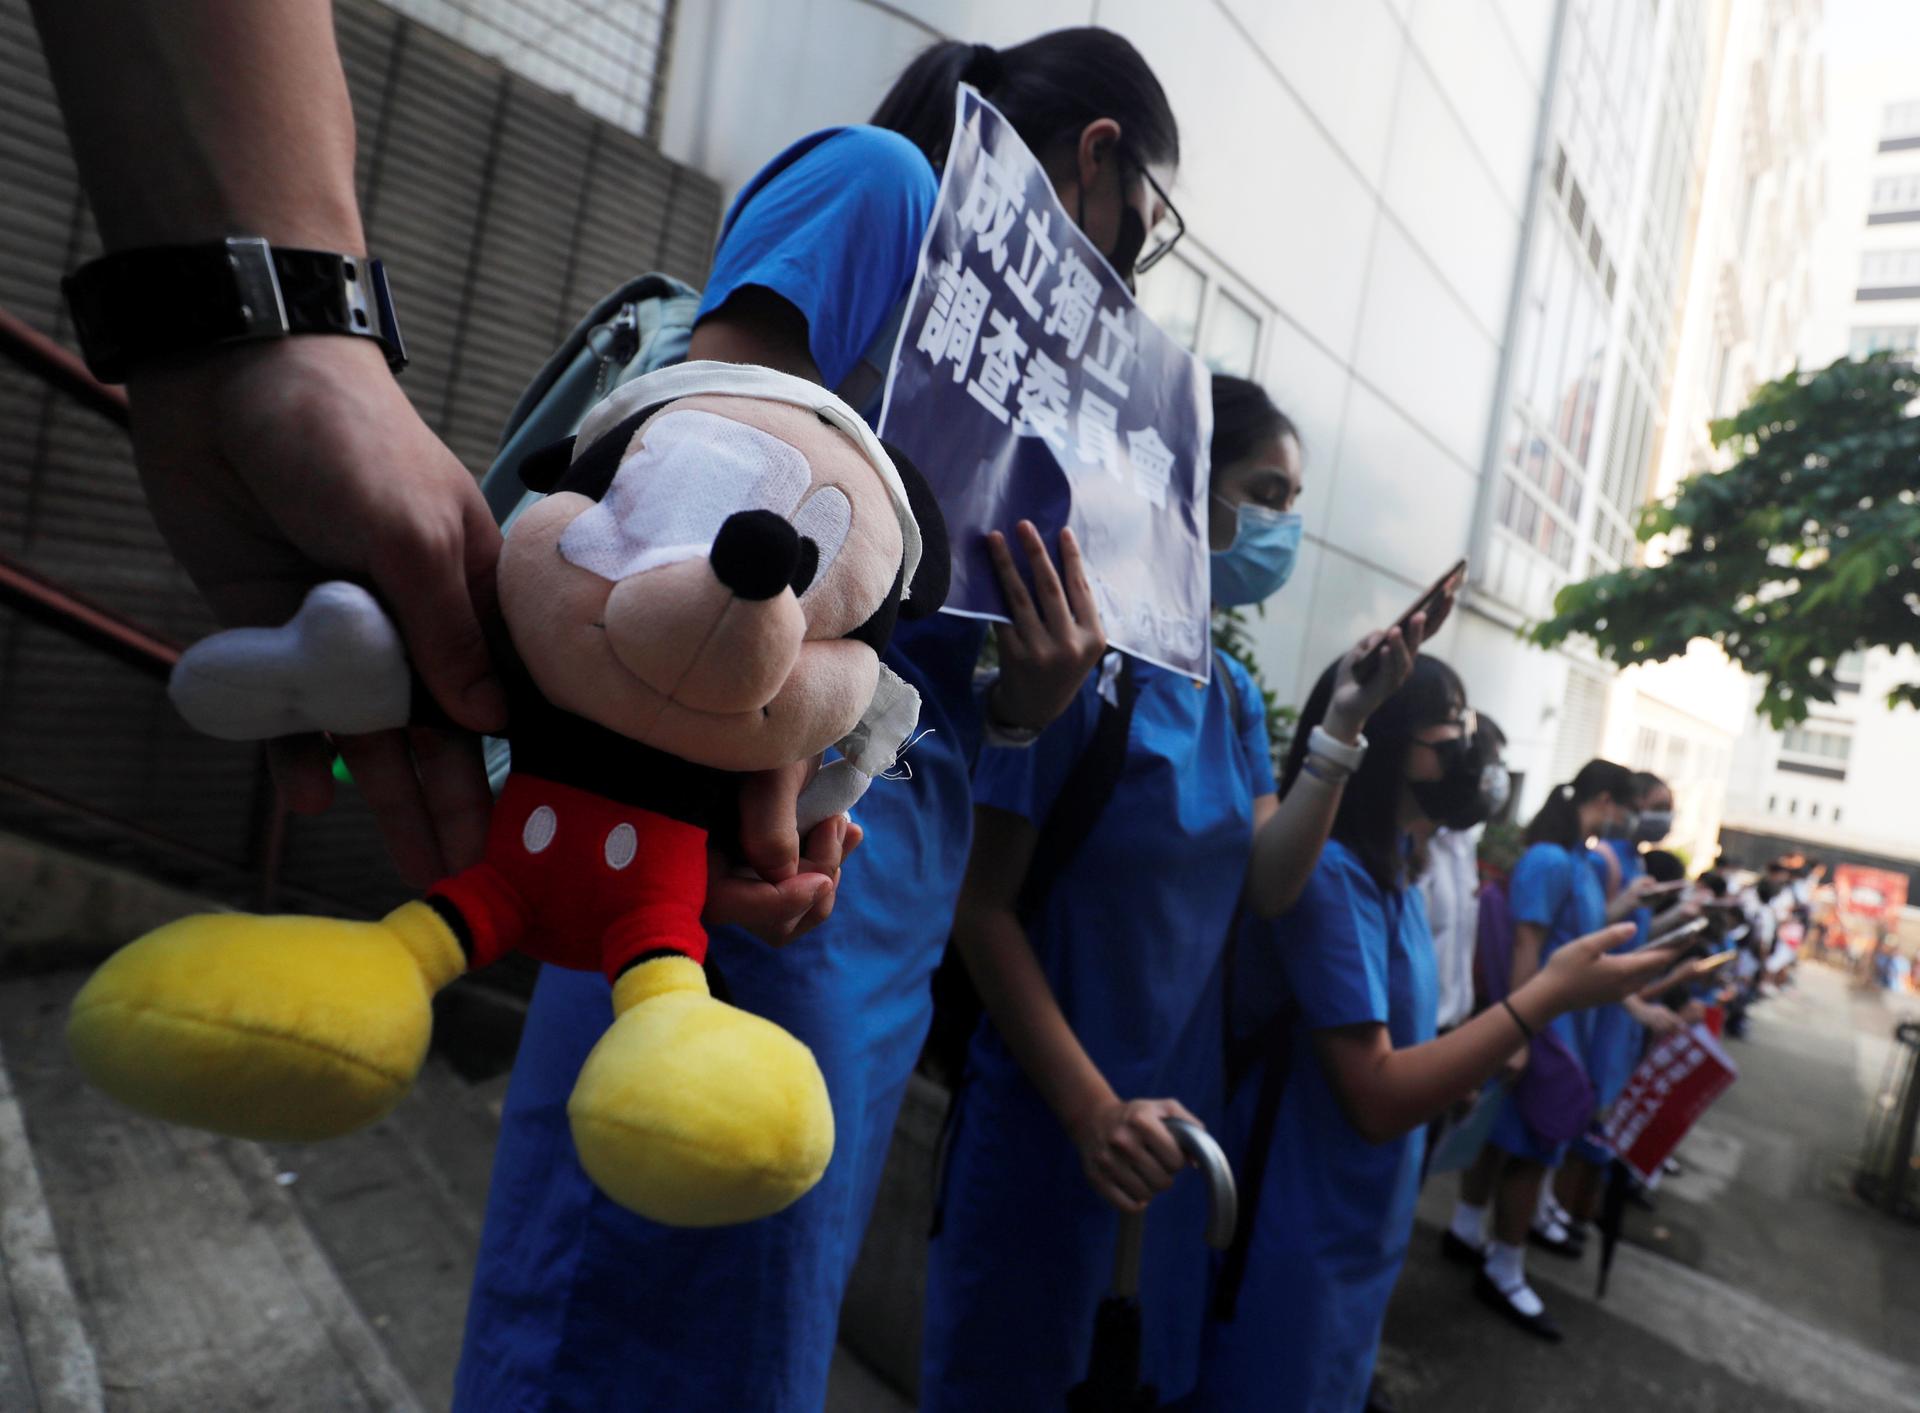 Secondary school students hold a Mickey Mouse stuffed doll with an eye patch as they form a human chain